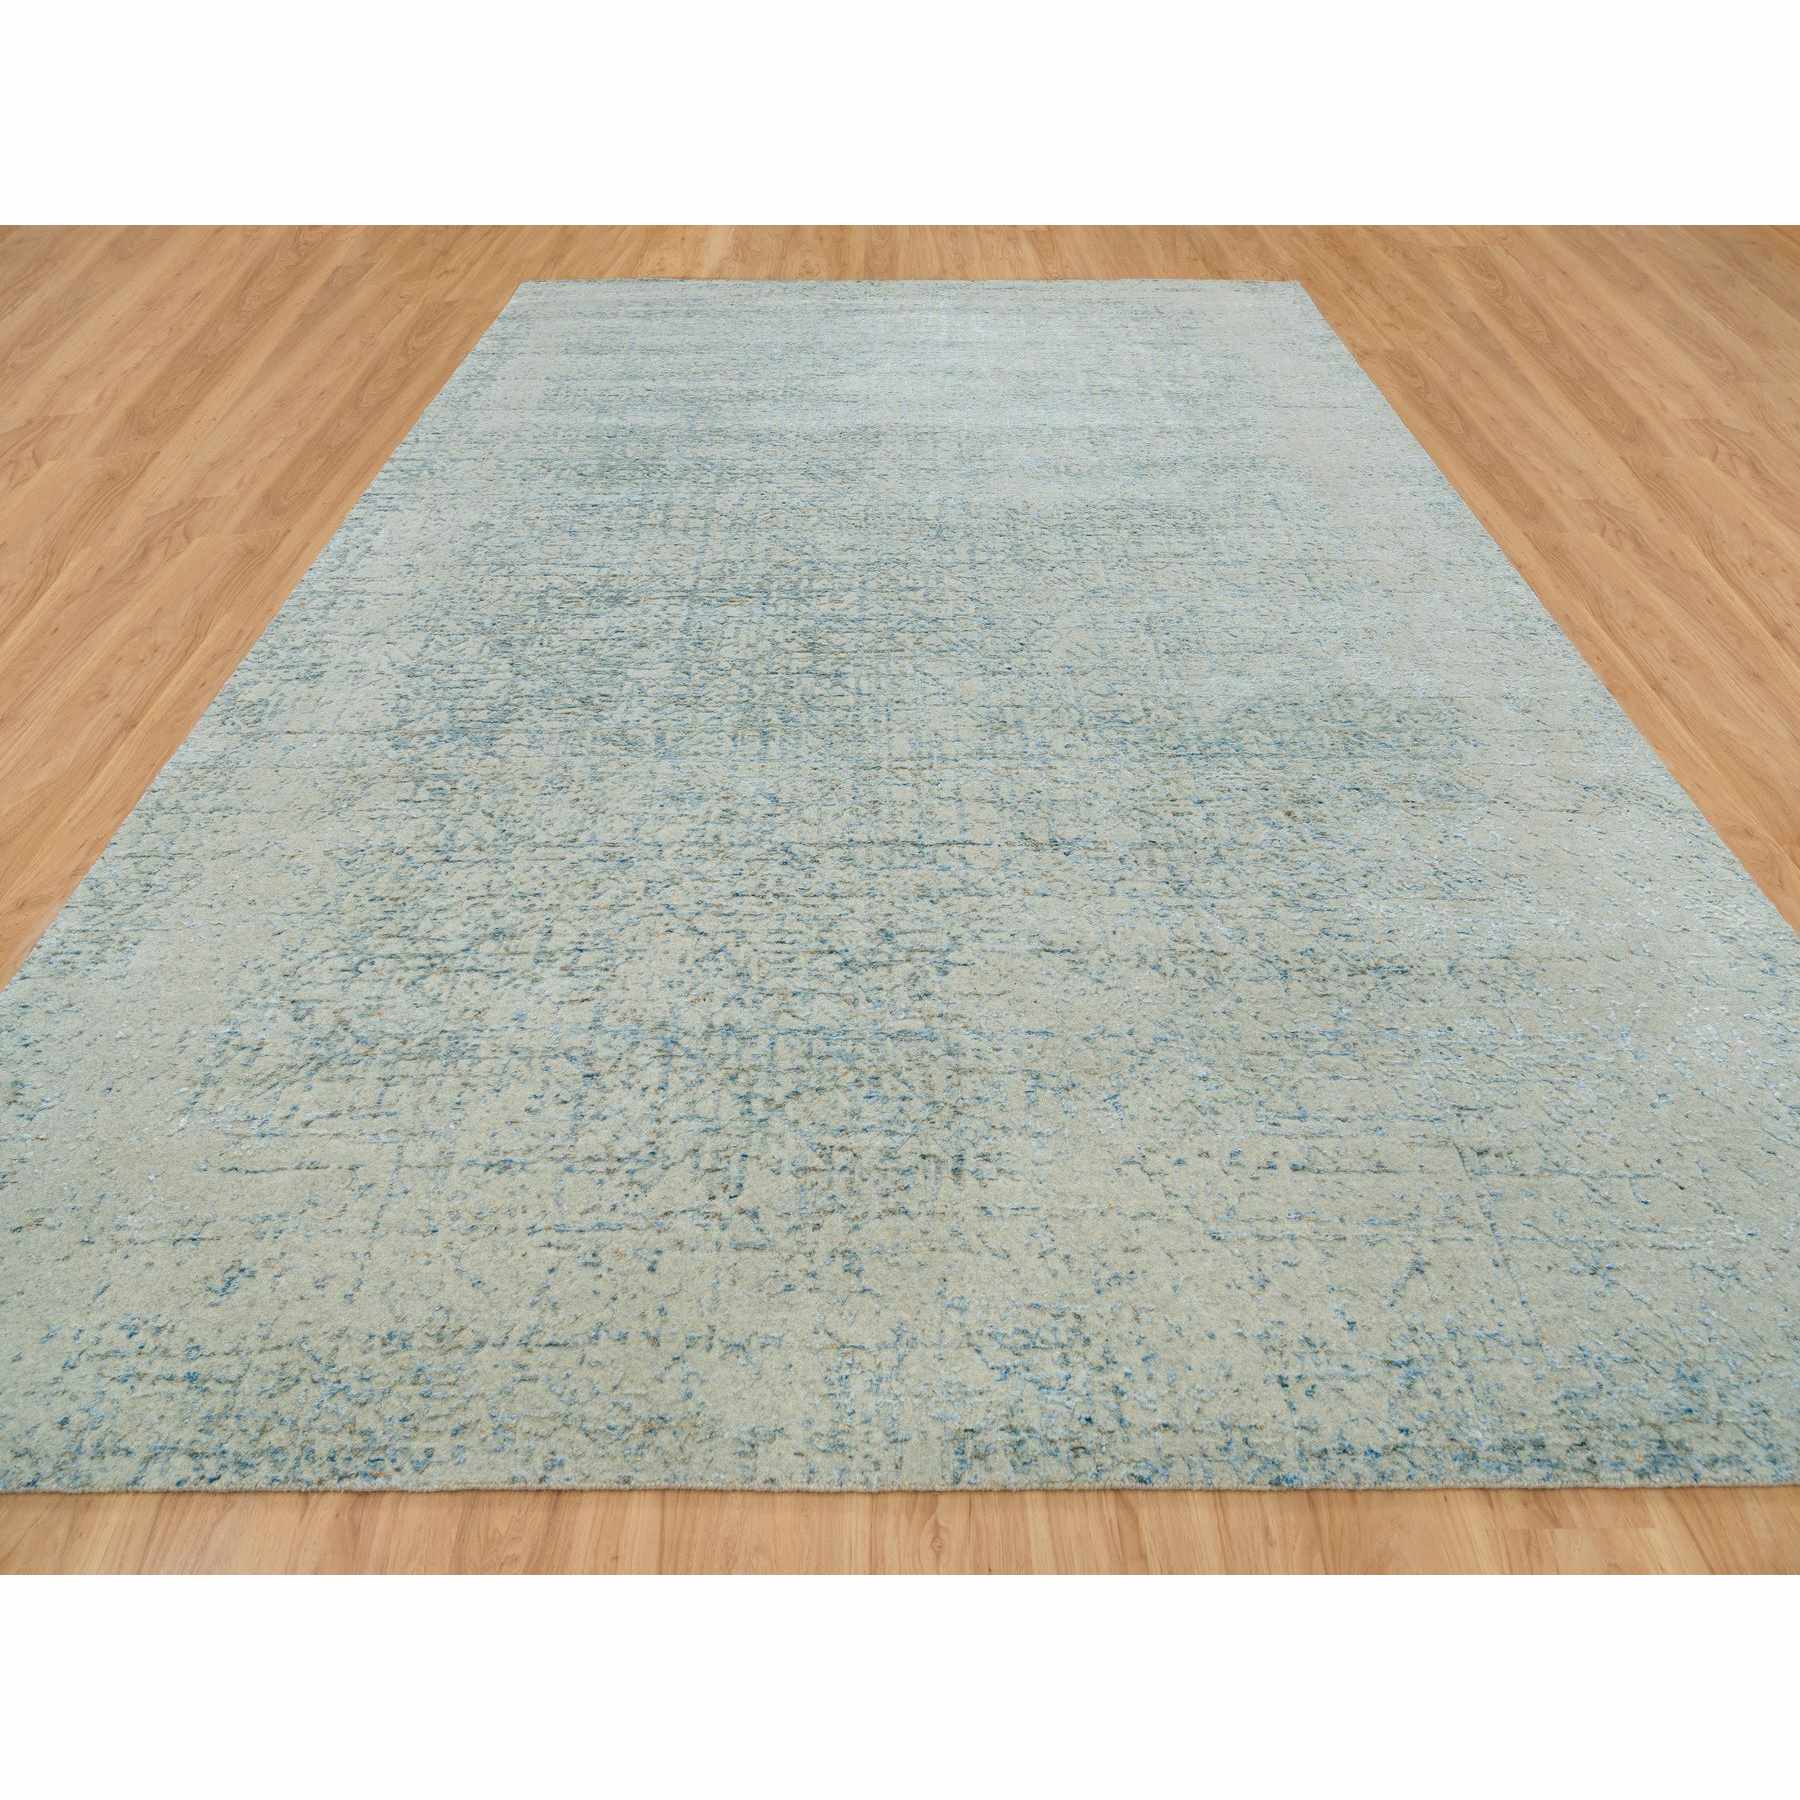 Modern-and-Contemporary-Hand-Loomed-Rug-326050